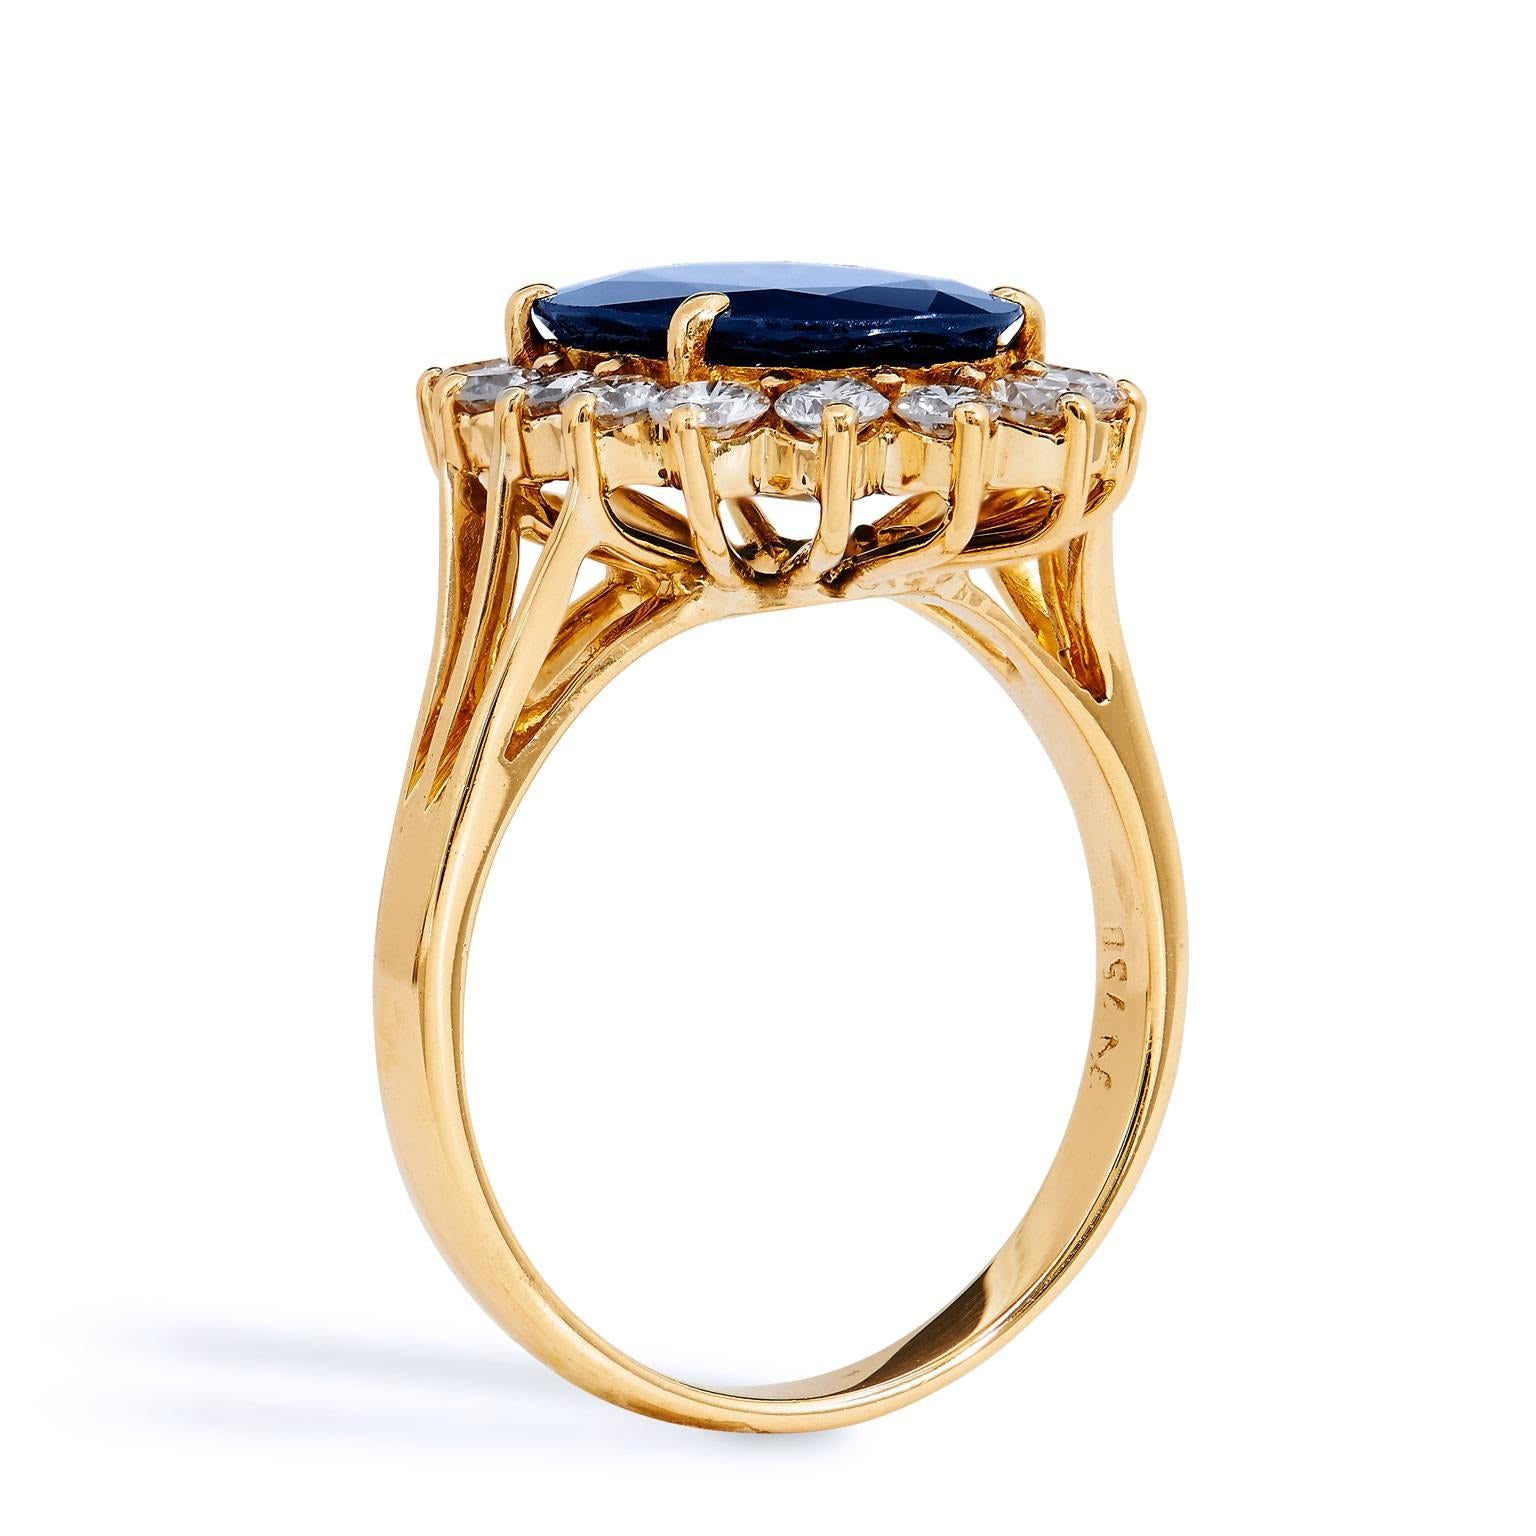 Previously loved 18 karat yellow gold ring featuring a 4.47 carat oval sapphire set at center. To further accentuate the deep sea of blue at center, sixteen round diamonds envelop the center gem with approximately 1.00 carat of sumptuous and